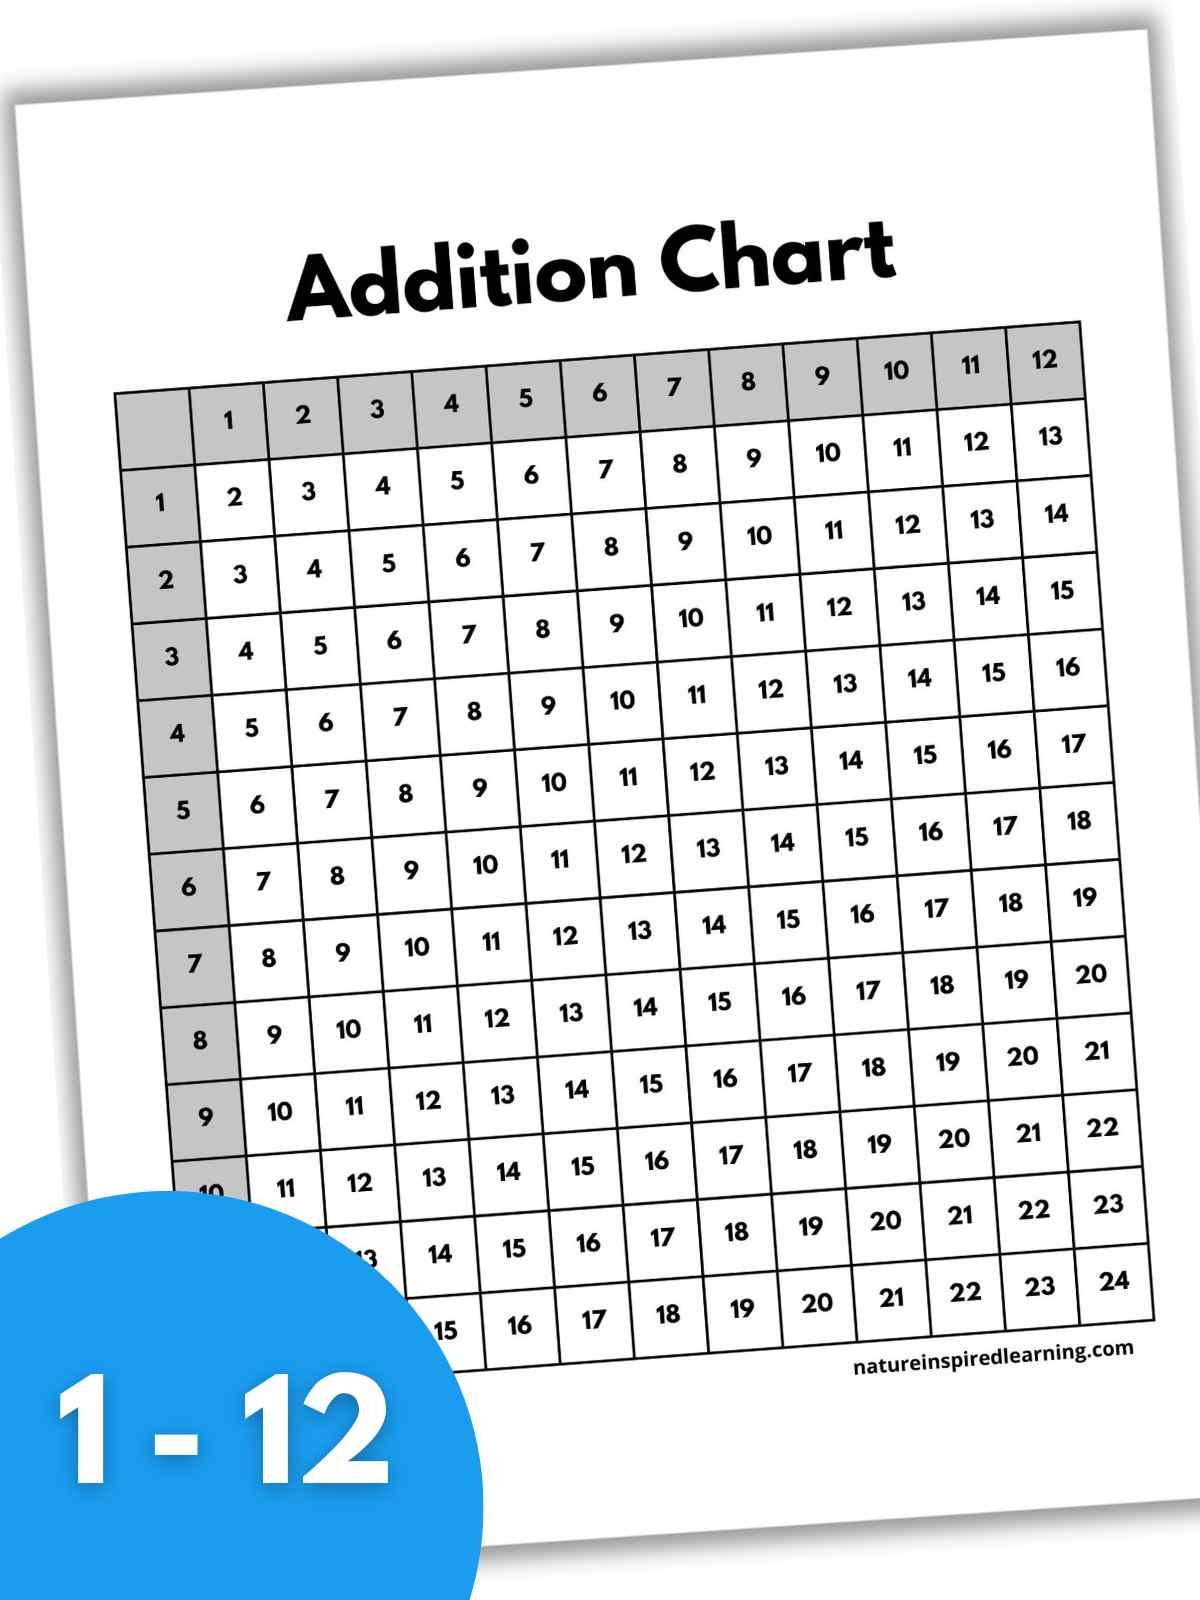 Black and white addition chart with numbers 1-12 with grey background on the first row and down the first column. Printable slanted with a drop shadow with a bright blue circle bottom left with white numbers overlay